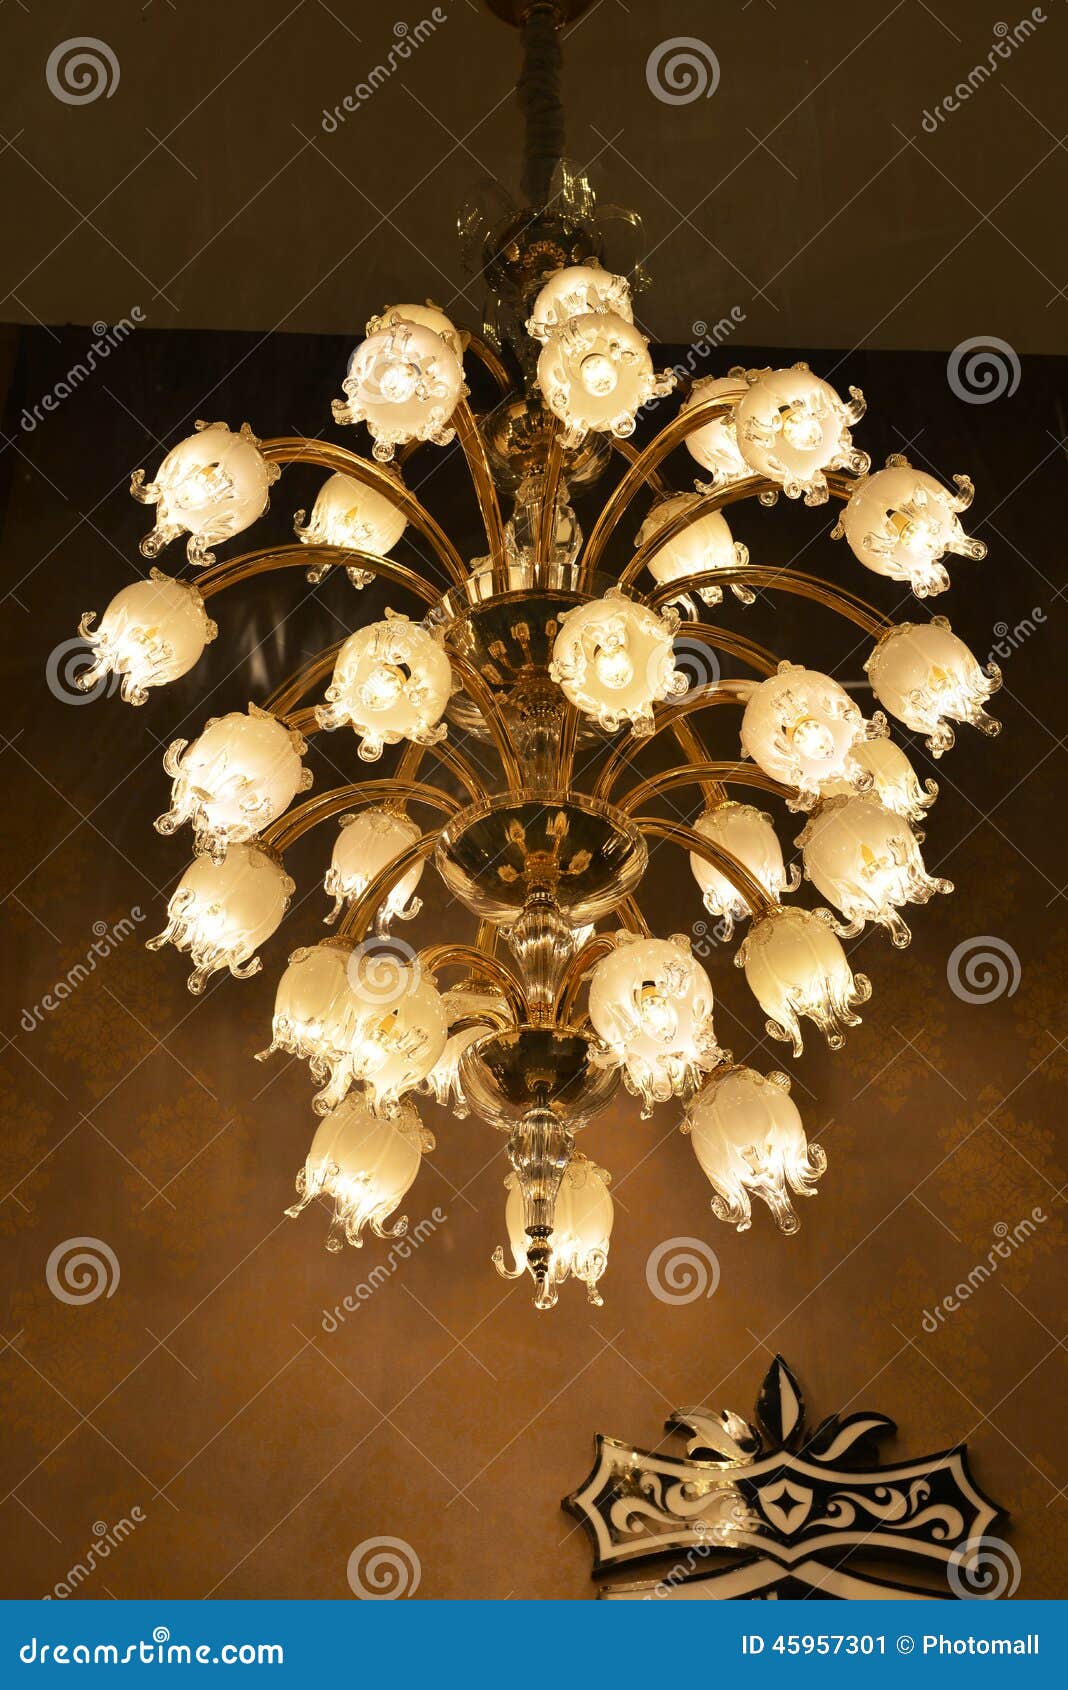 crystal chandeliers romantic home furnishing decoration